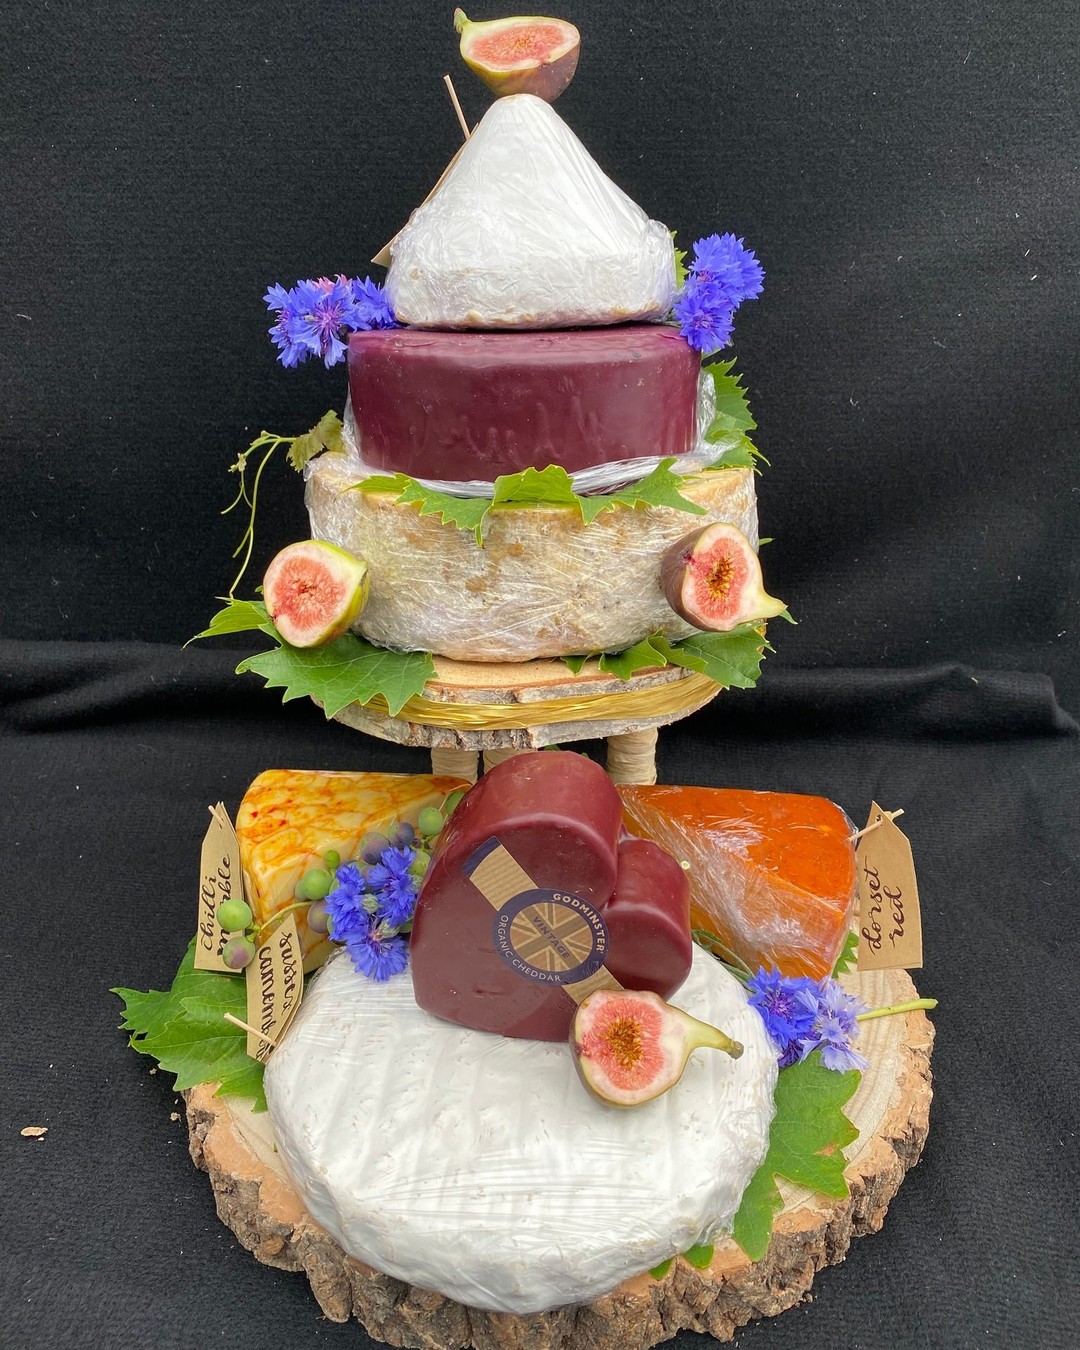 Today's cheese tower for a local wedding. It consists of 6 types of cheese, decorated with figs and our own grown cornflowers. #stilton with  Alsop & Walker 's Lord London and Sussex Brie;  Bruton Dairy 's Godminster Vintage Organic Cheddar, High Weald Dairy 's chilli marble; smoked Dorset red.  Do get in touch if you are interested in anything similar. Our best wishes to the bride & groom!

#britishcheese #cheeseweddingcake #farmshop